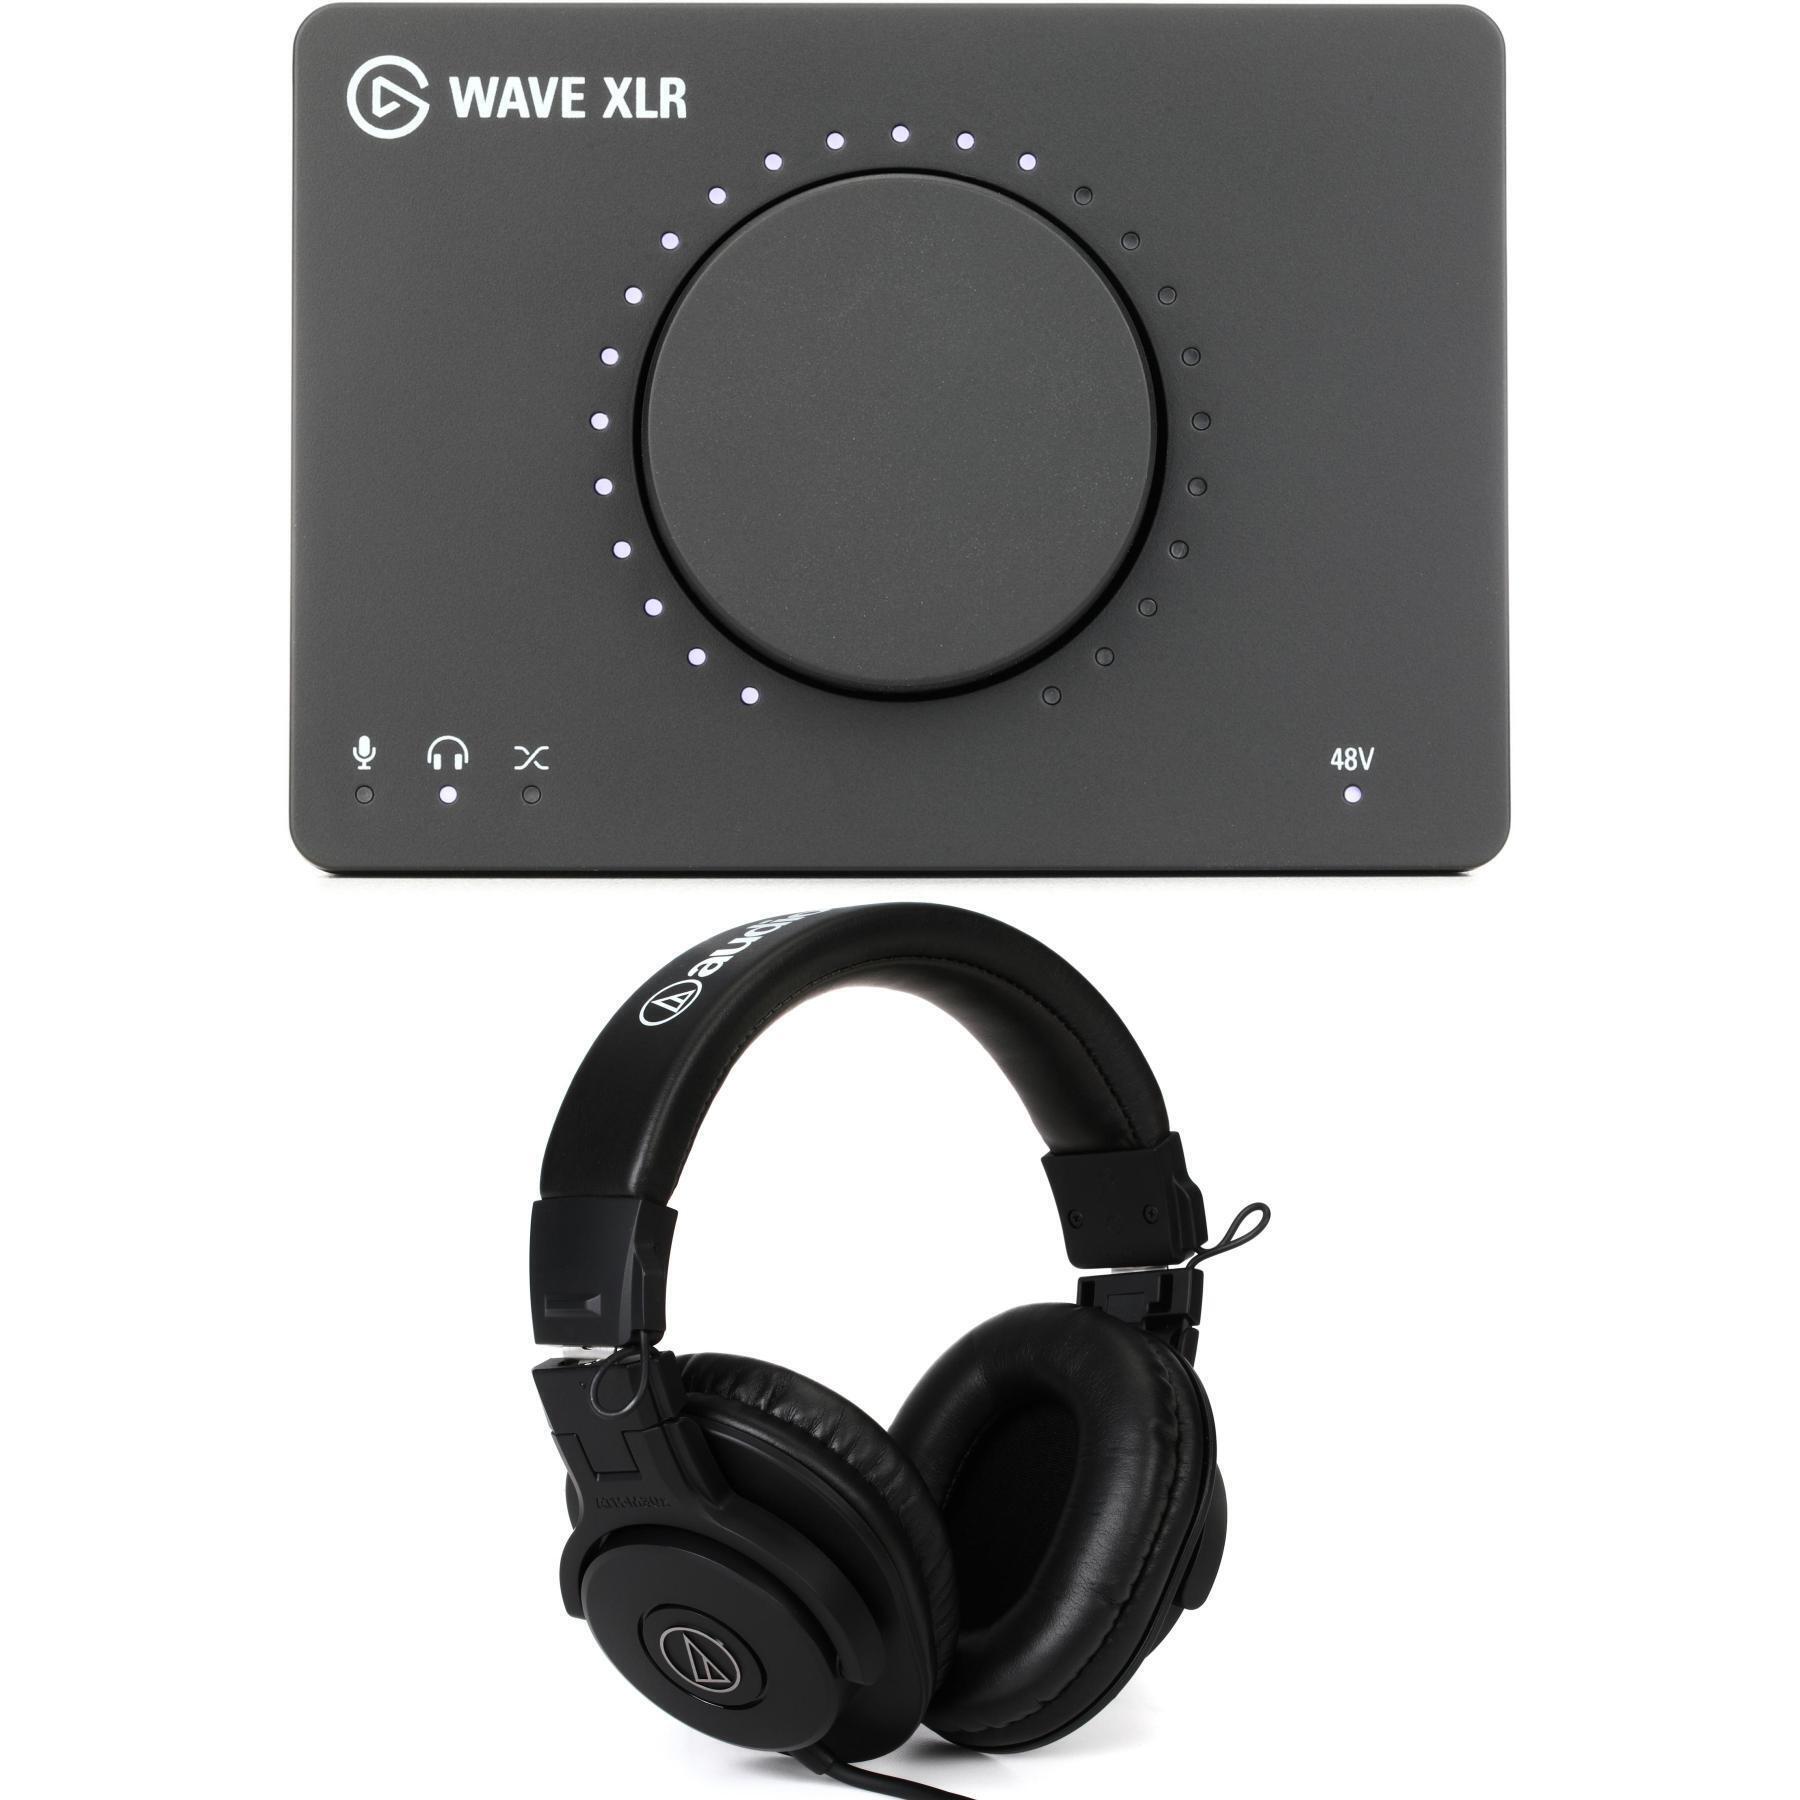 Complete your Elgato streaming setup with its Wave XLR Audio Interface down  at $130 shipped